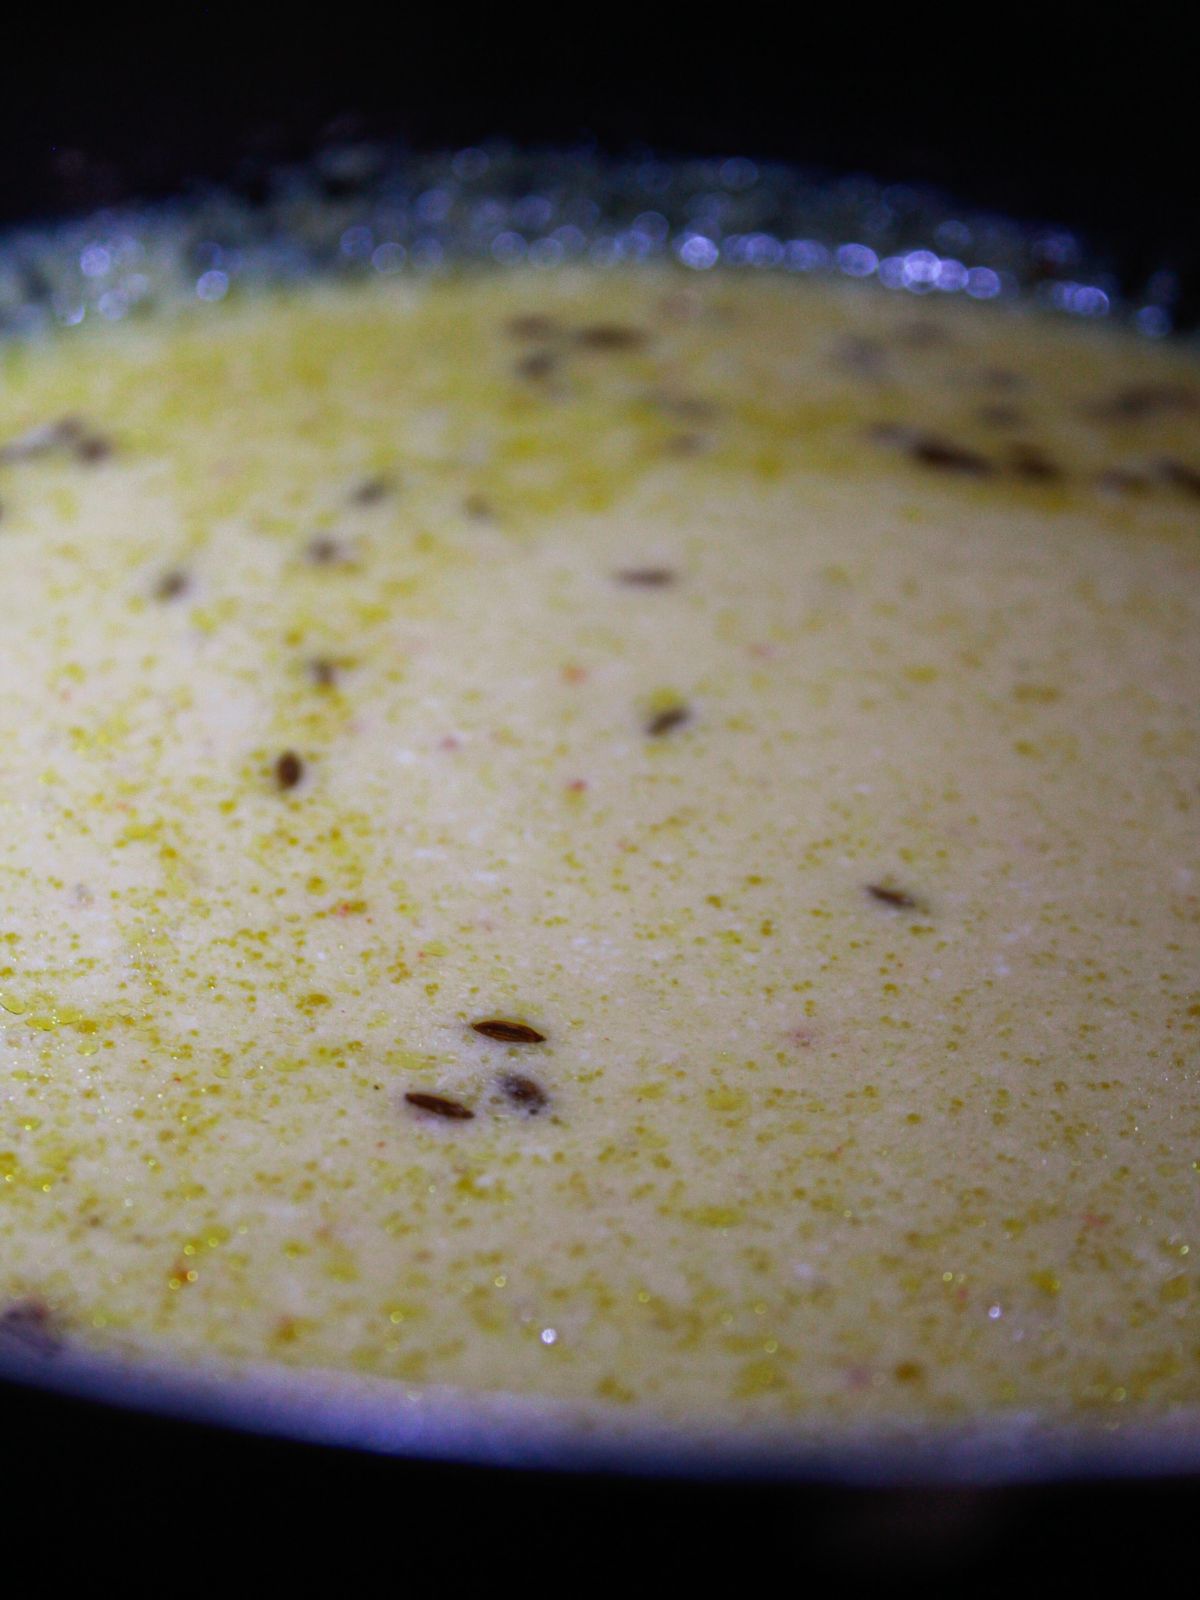 Add kadhi mix with the tampering